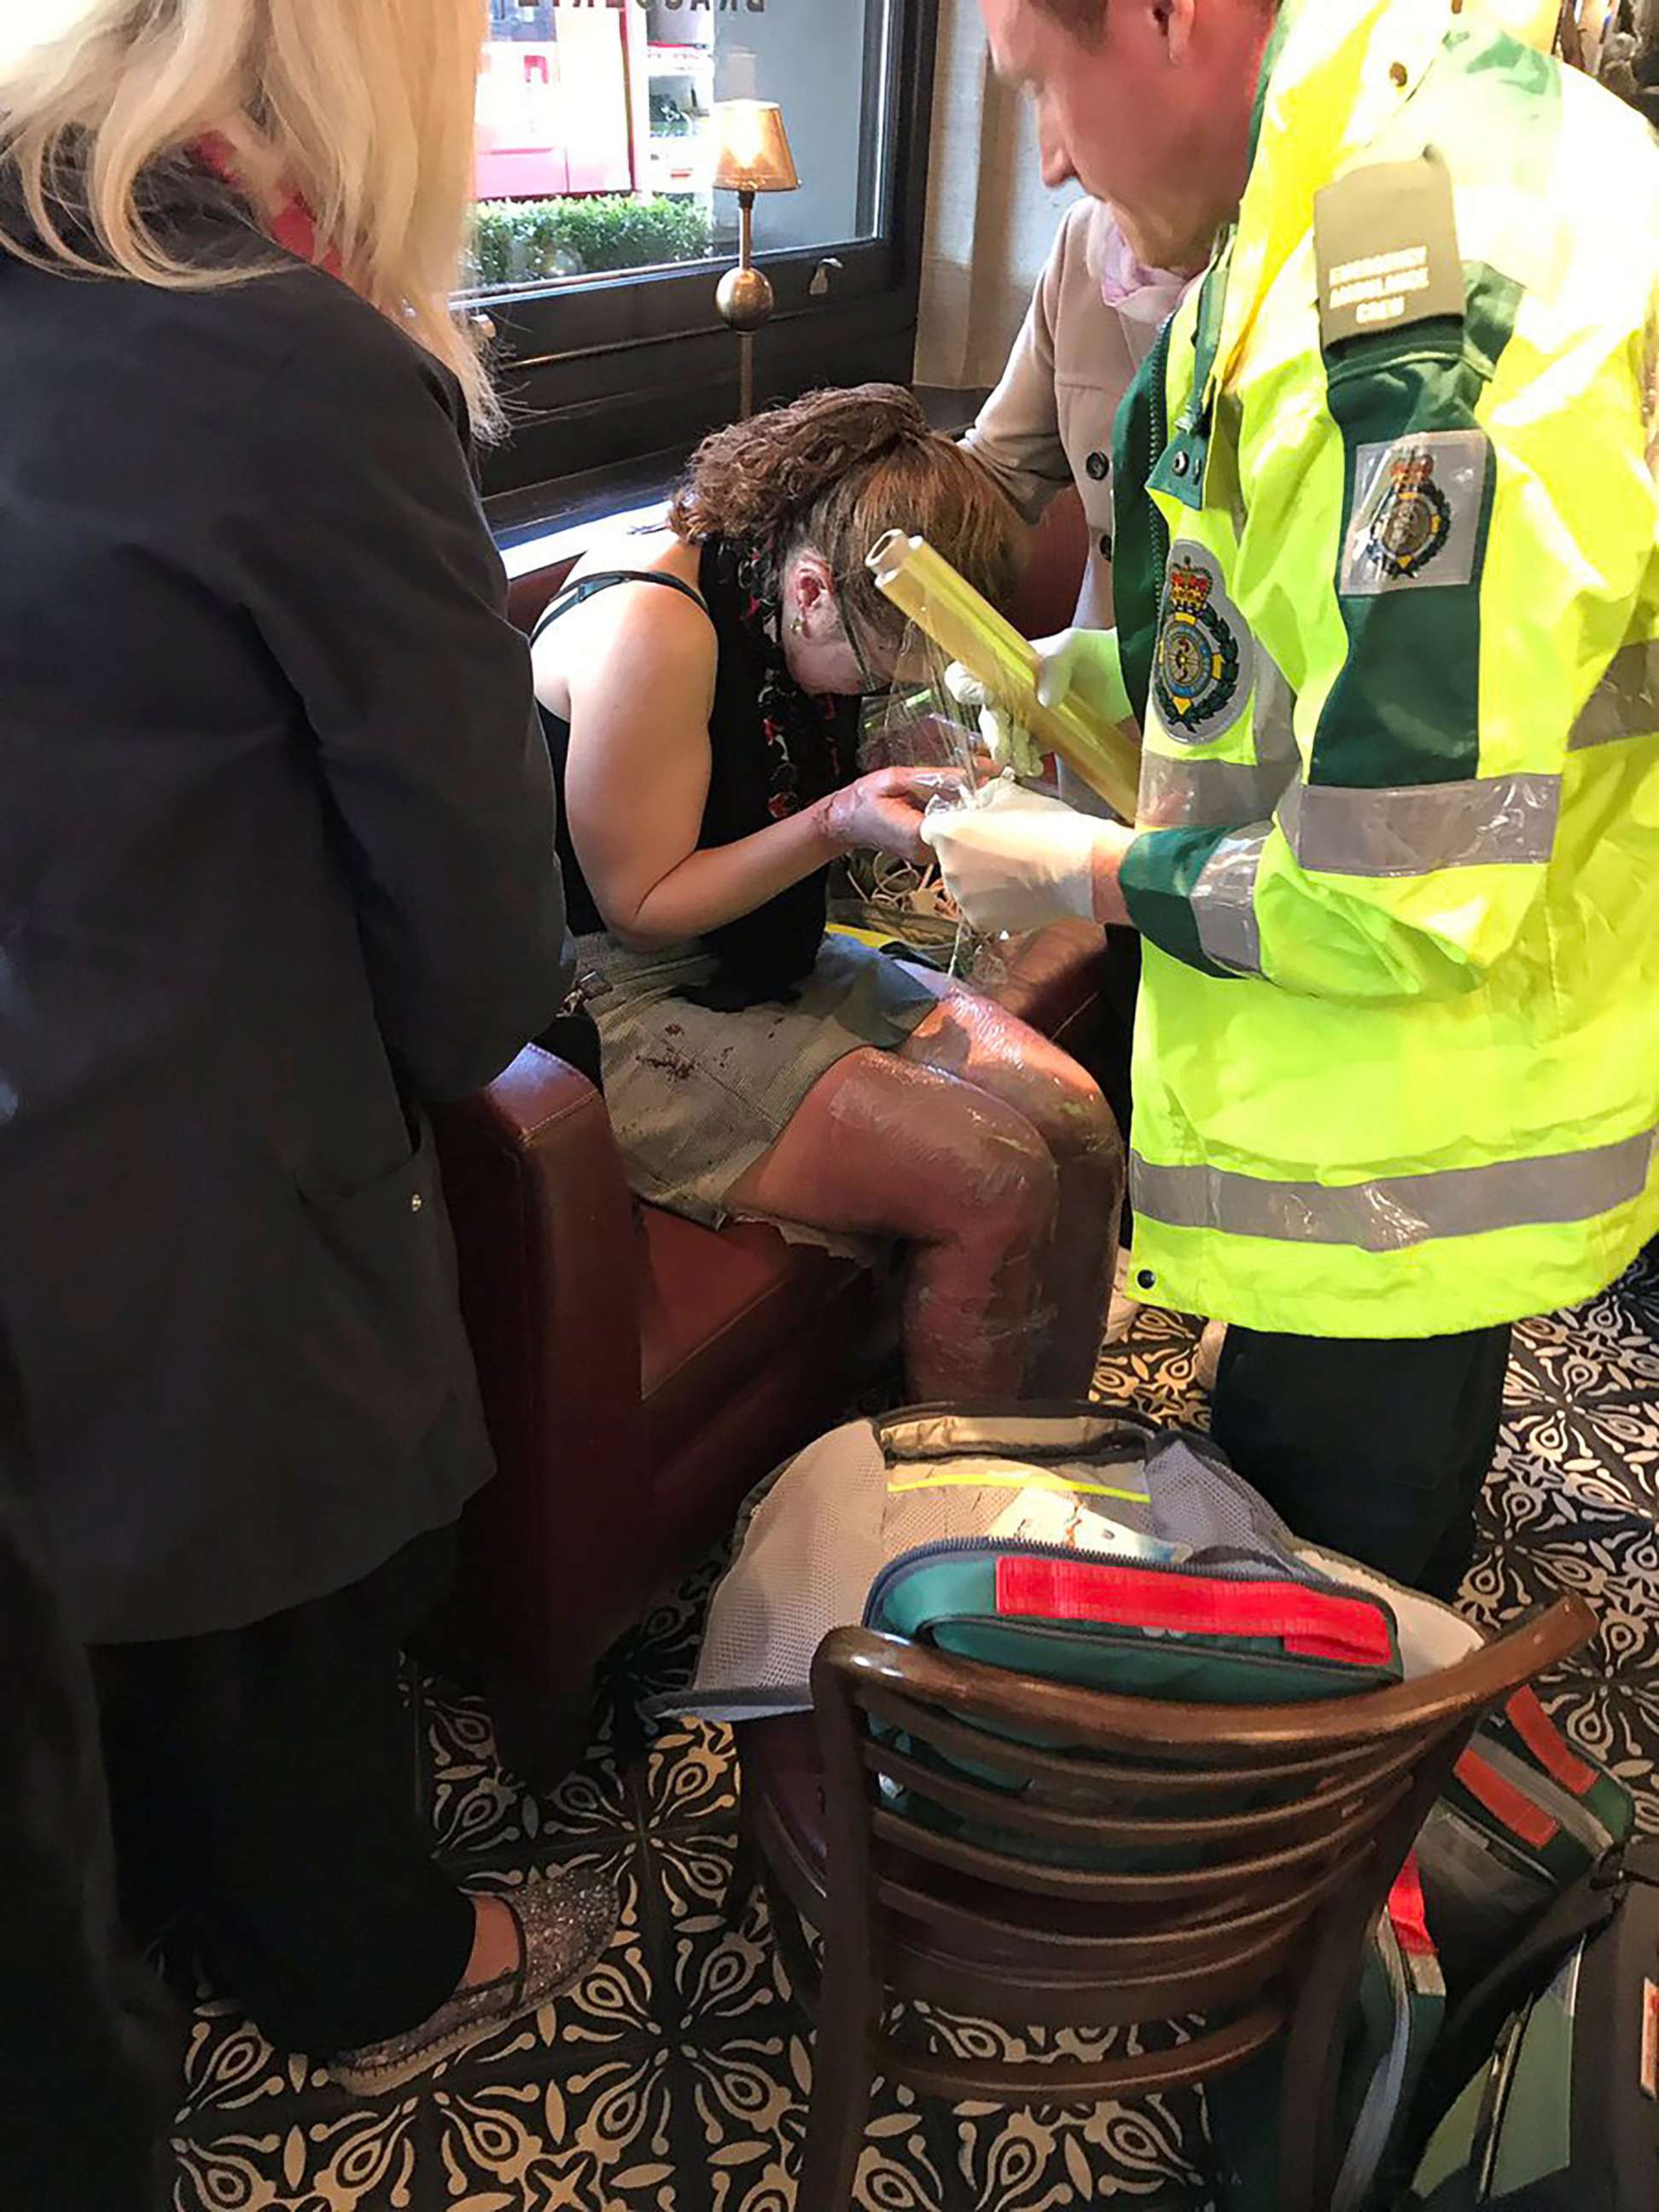 PHOTO: Emergency services tend to an injured woman following a blast on an underground train at Parsons Green tube station in West London, Sept. 15, 2017, in an image posted to social media.